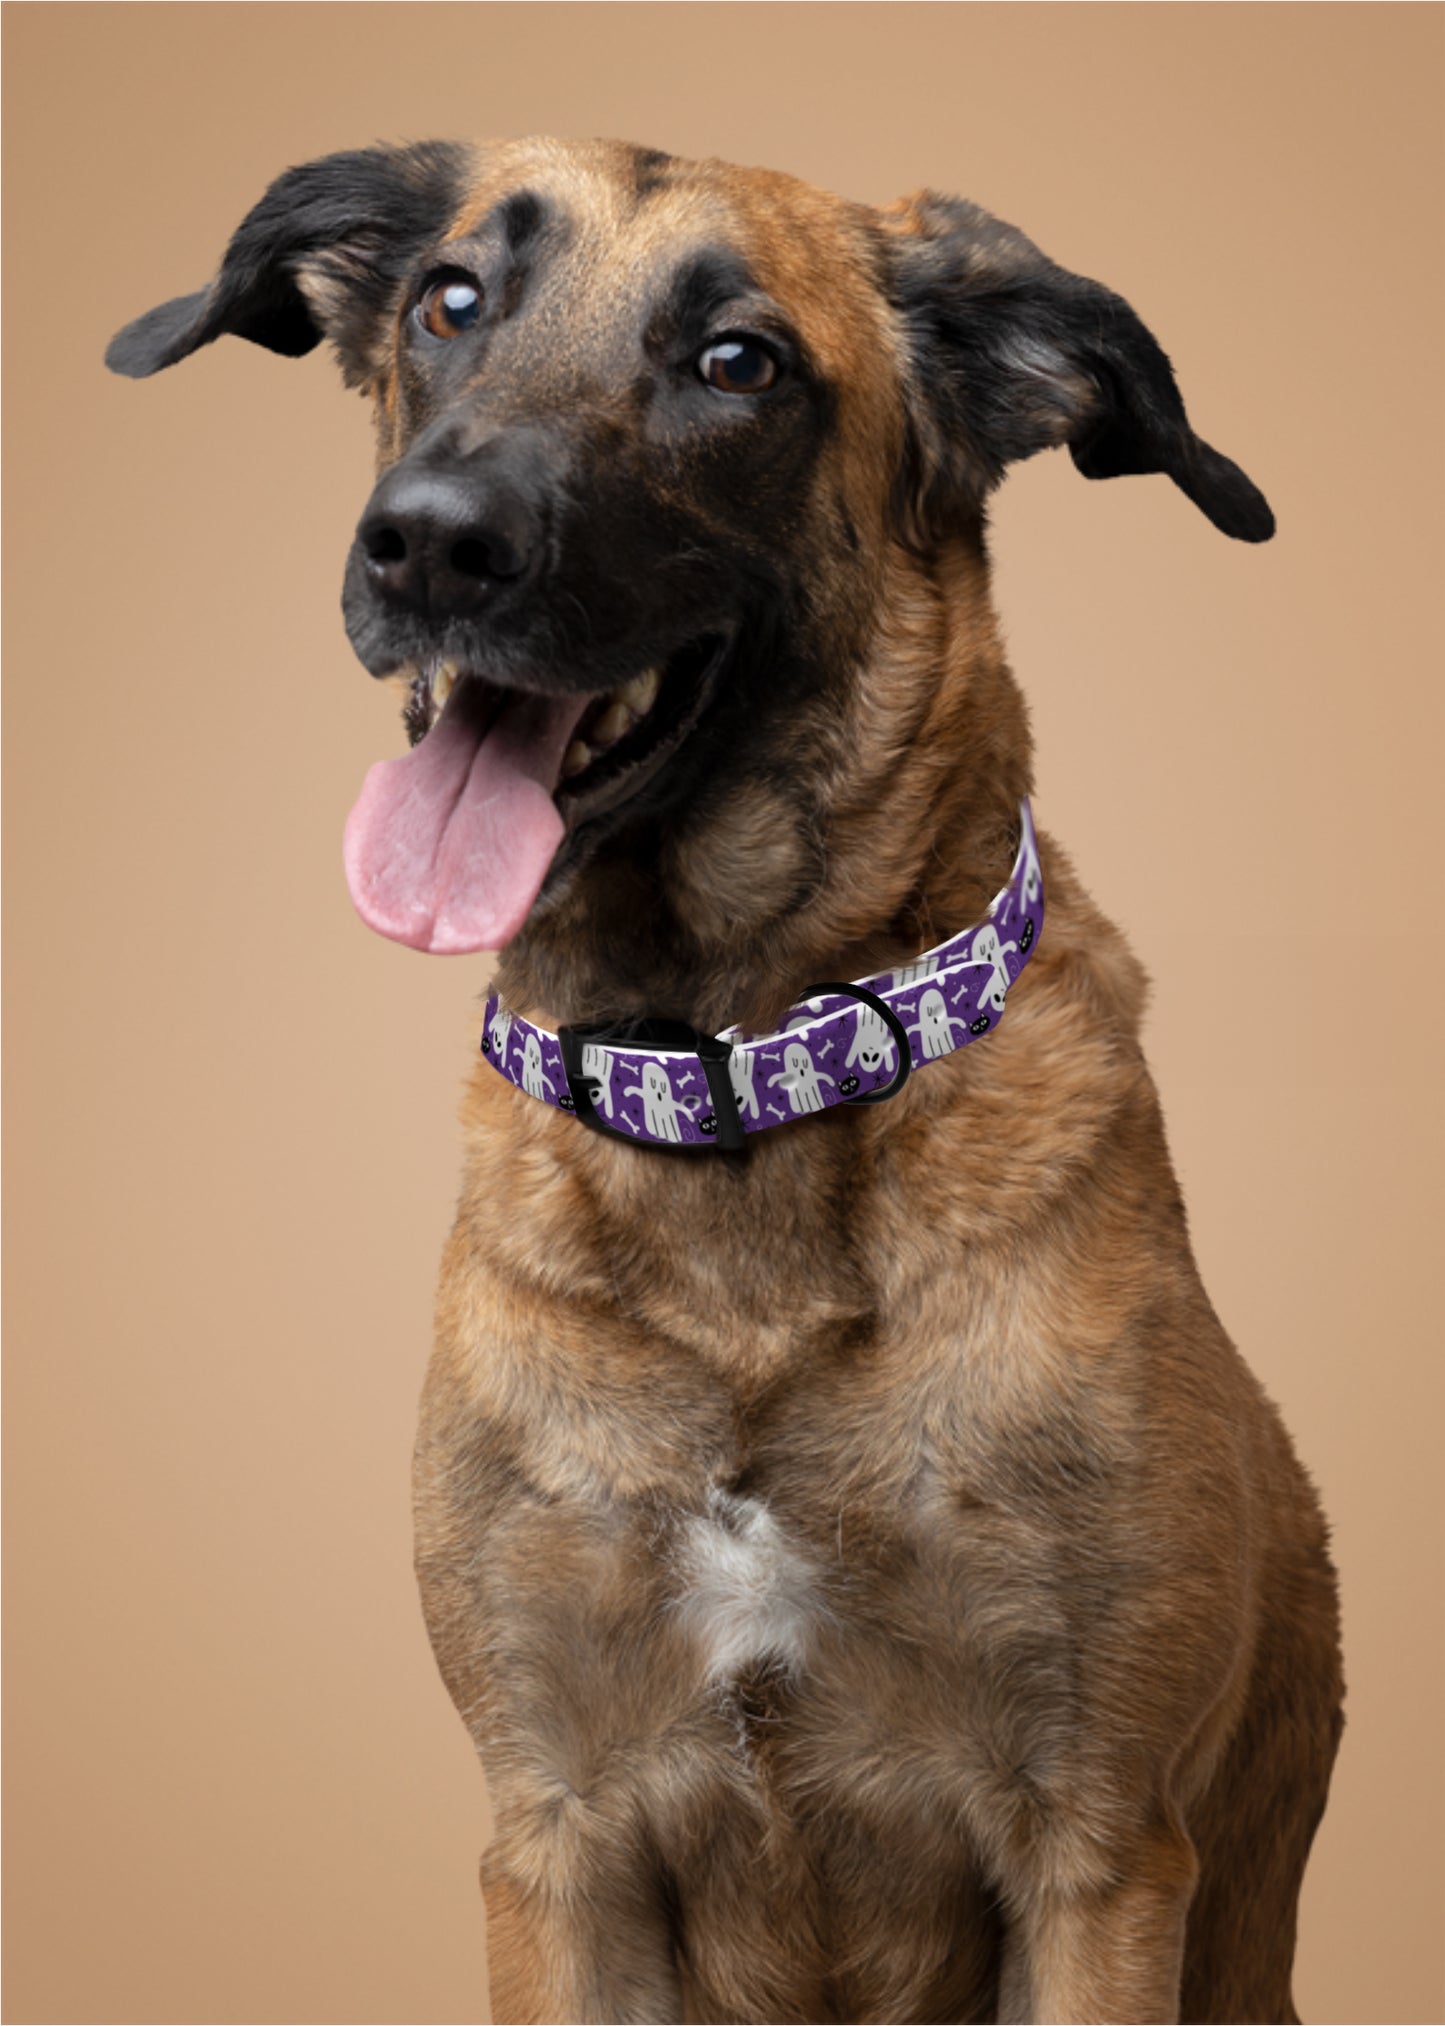 Personalized Ghost Dog Collar | Antimicrobial, Waterproof & Odor Resistant